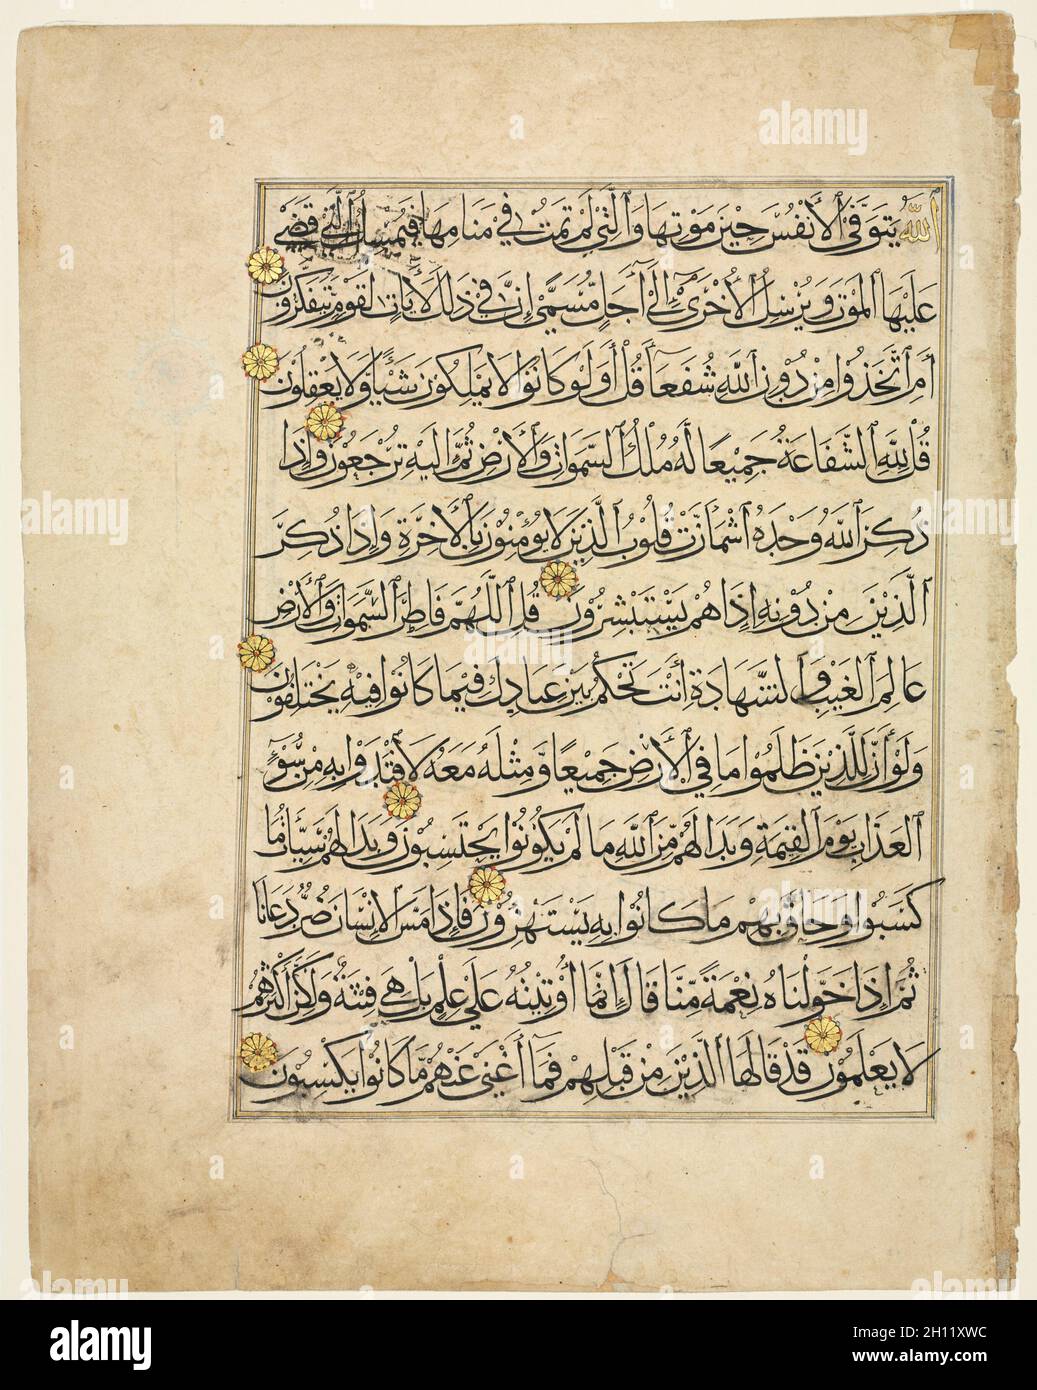 Qur'an Manuscript Folio (recto), 1300s. Egypt, Mamluk Period, 14th century. Ink, gold, and colors on paper; sheet: 41.2 x 32.4 cm (16 1/4 x 12 3/4 in.); text area: 30.3 x 22.5 cm (11 15/16 x 8 7/8 in.). Stock Photo